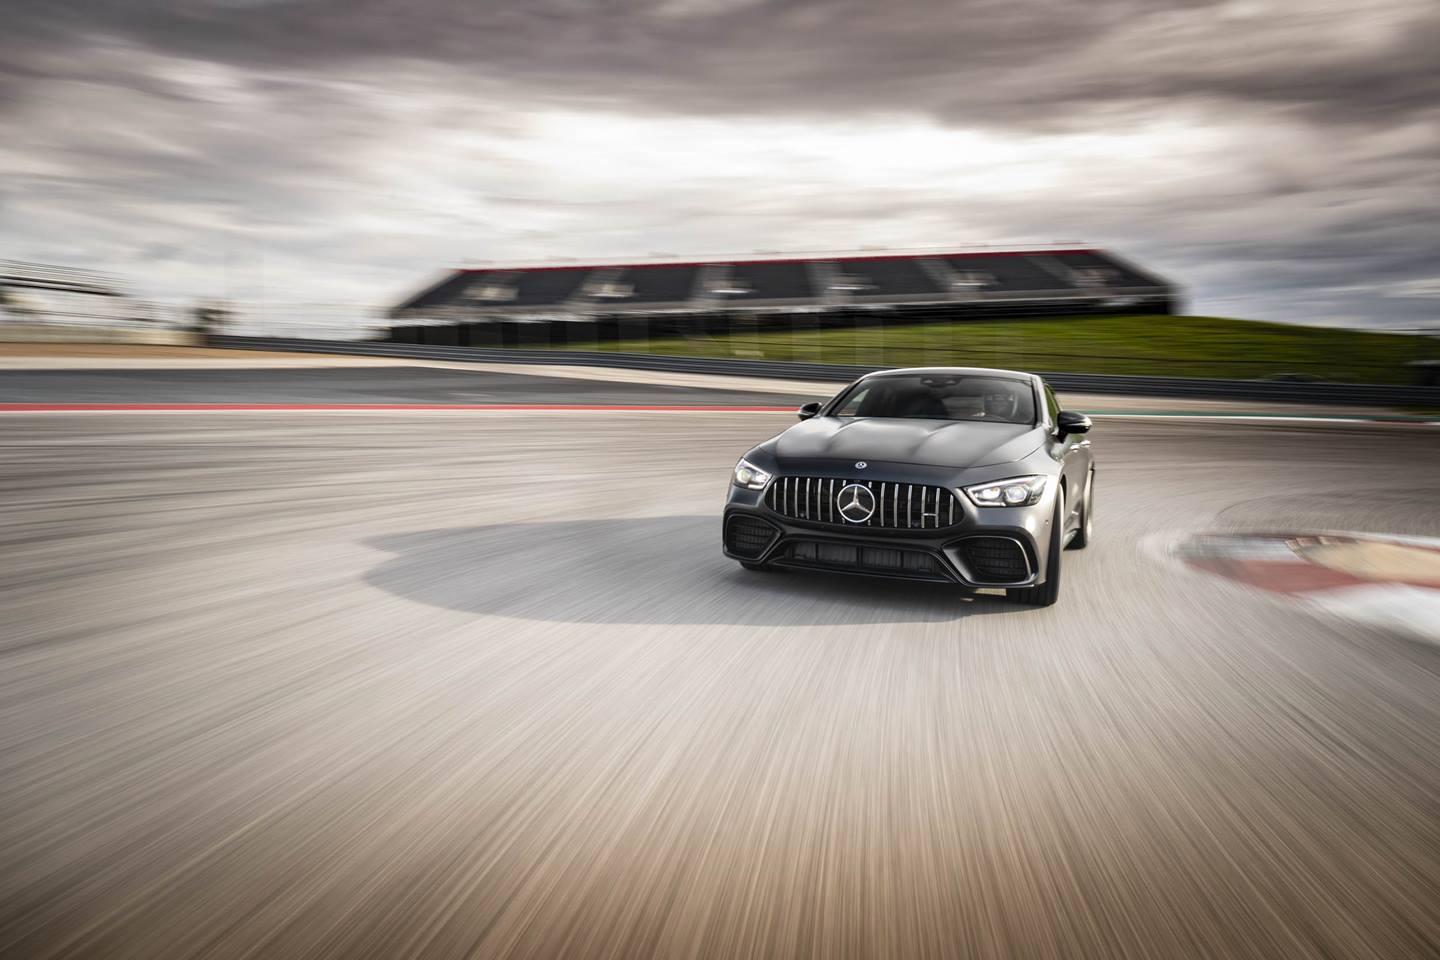 The 2019 Mercedes AMG GT 4 Door Is Hungry For Porsche's Lunch